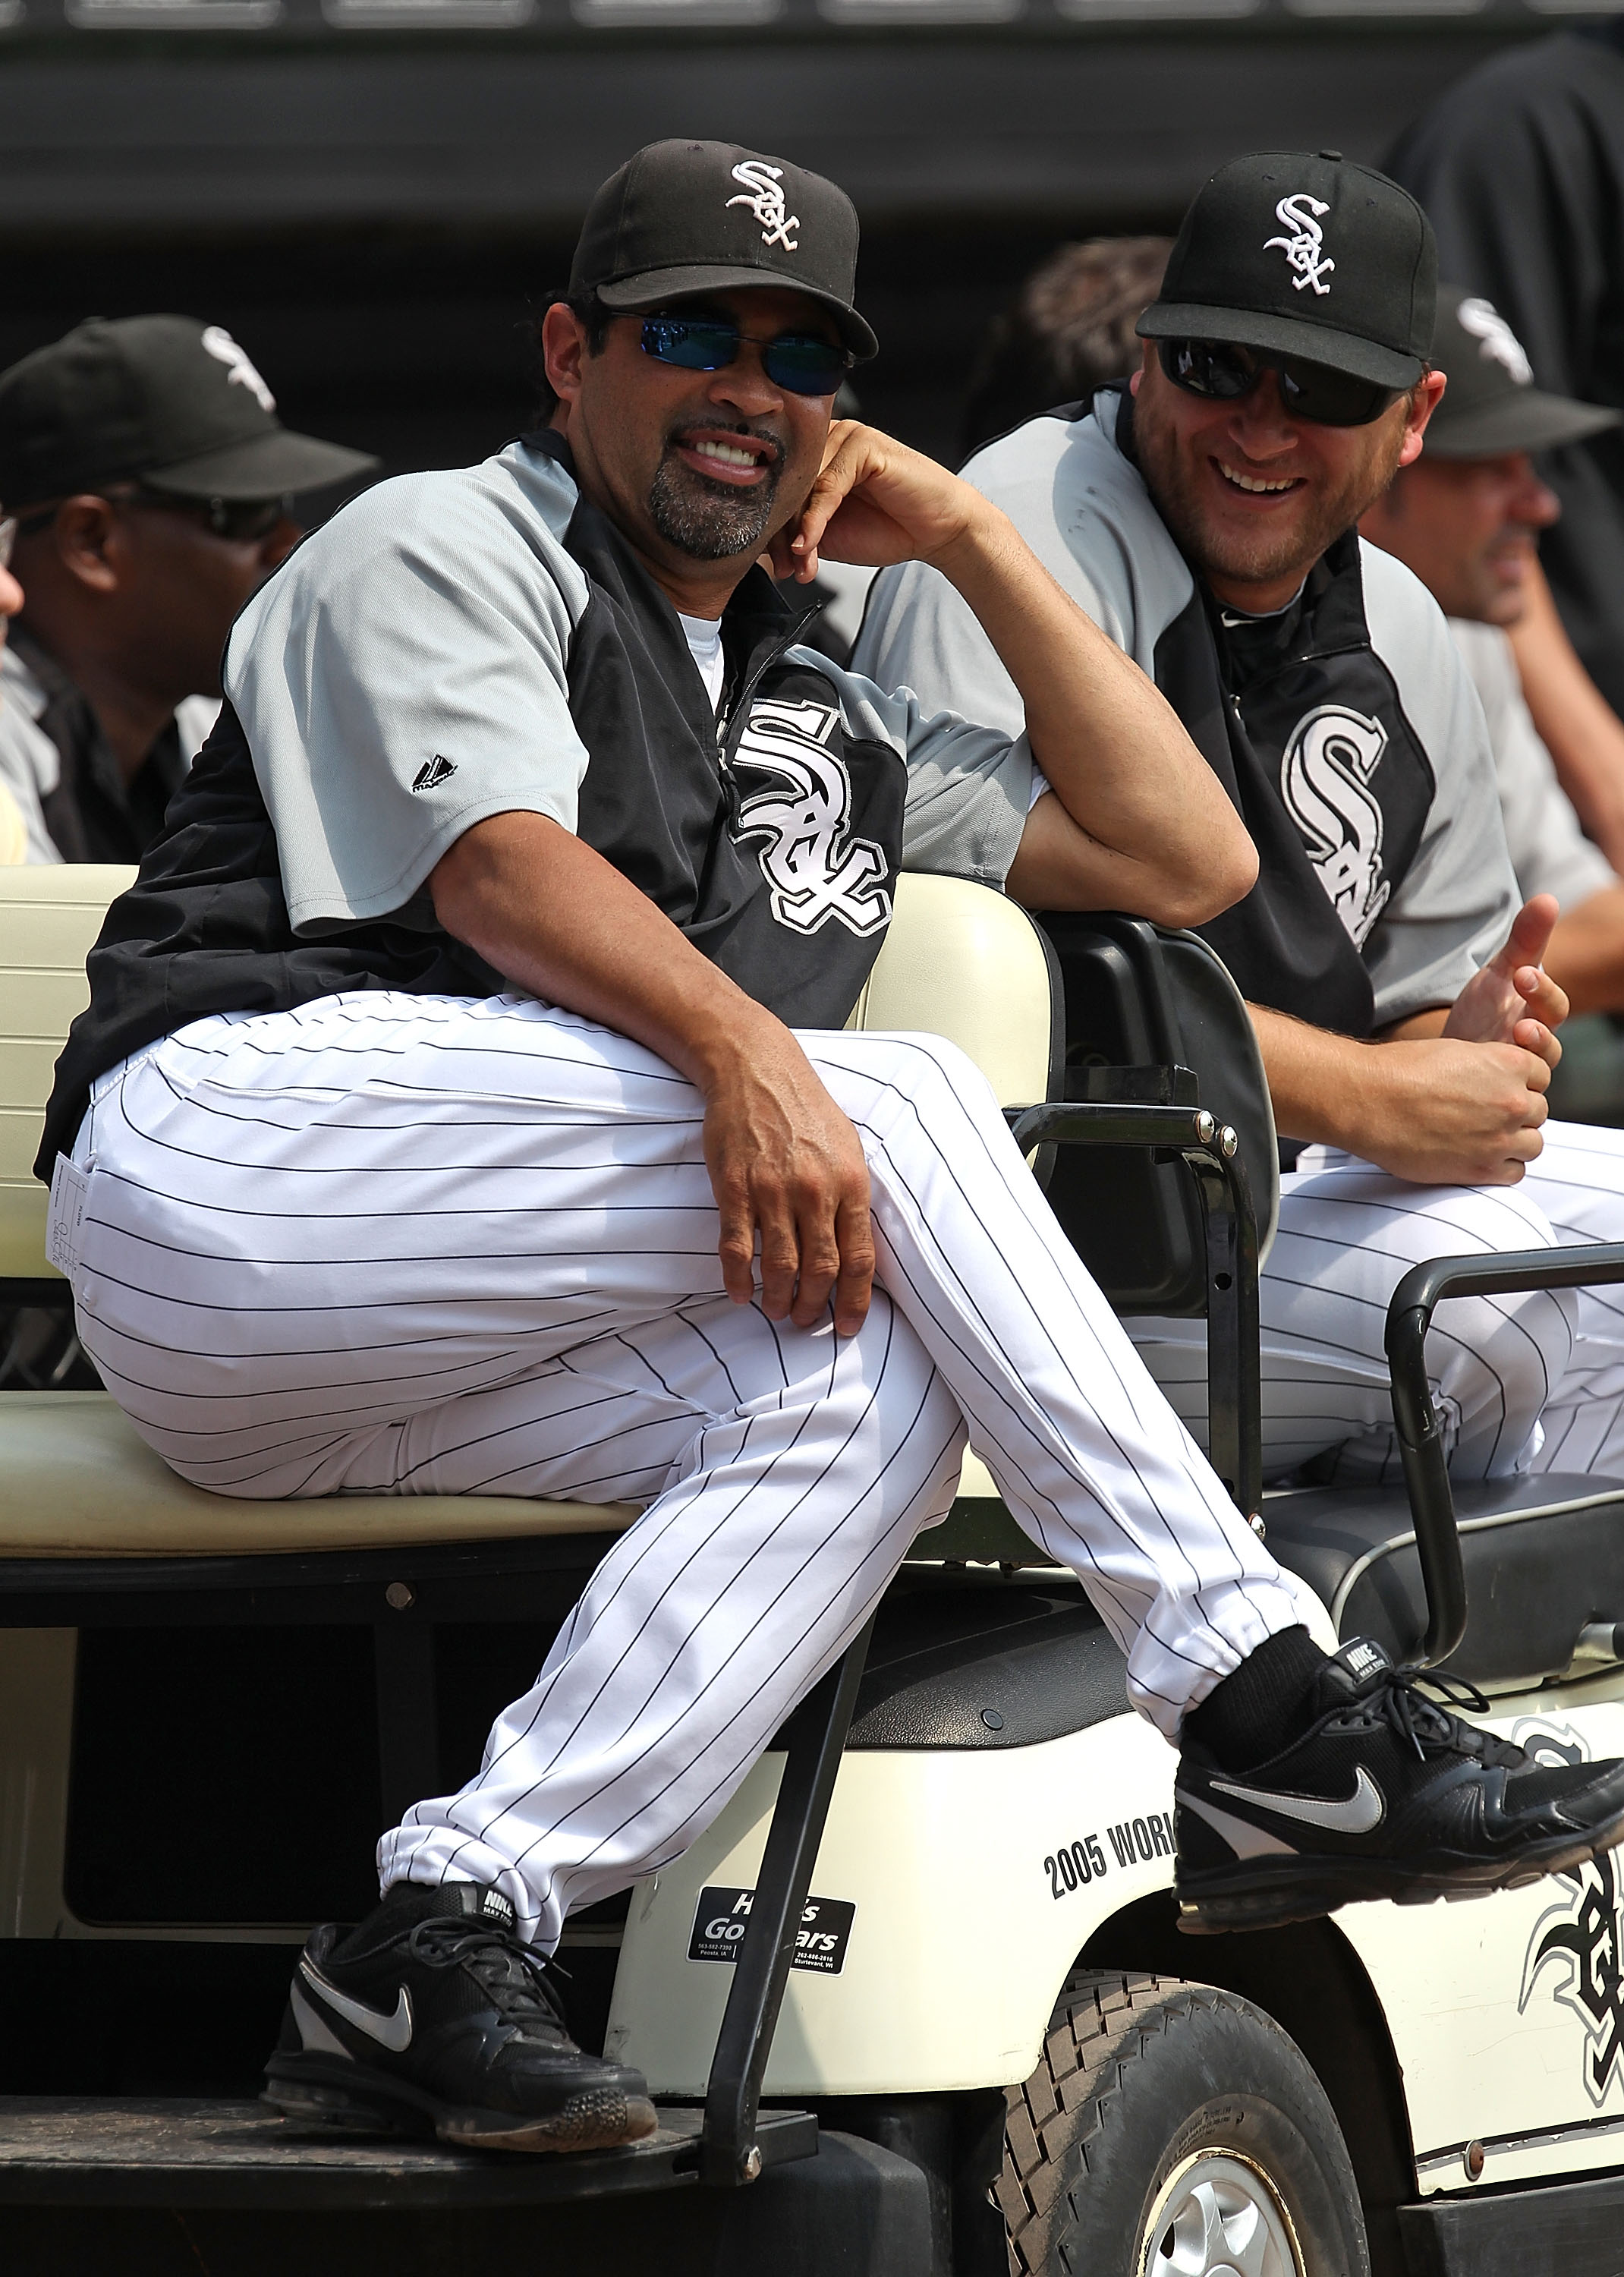 CHICAGO - AUGUST 29: Manager Ozzie Guillen #13 (L) and Mark Buehrle #56 of the Chicago White Sox enjoy a ceremony retiring former player Frank Thomas' number 35 before a game against the New York Yankees at U.S. Cellular Field on August 29, 2010 in Chicag